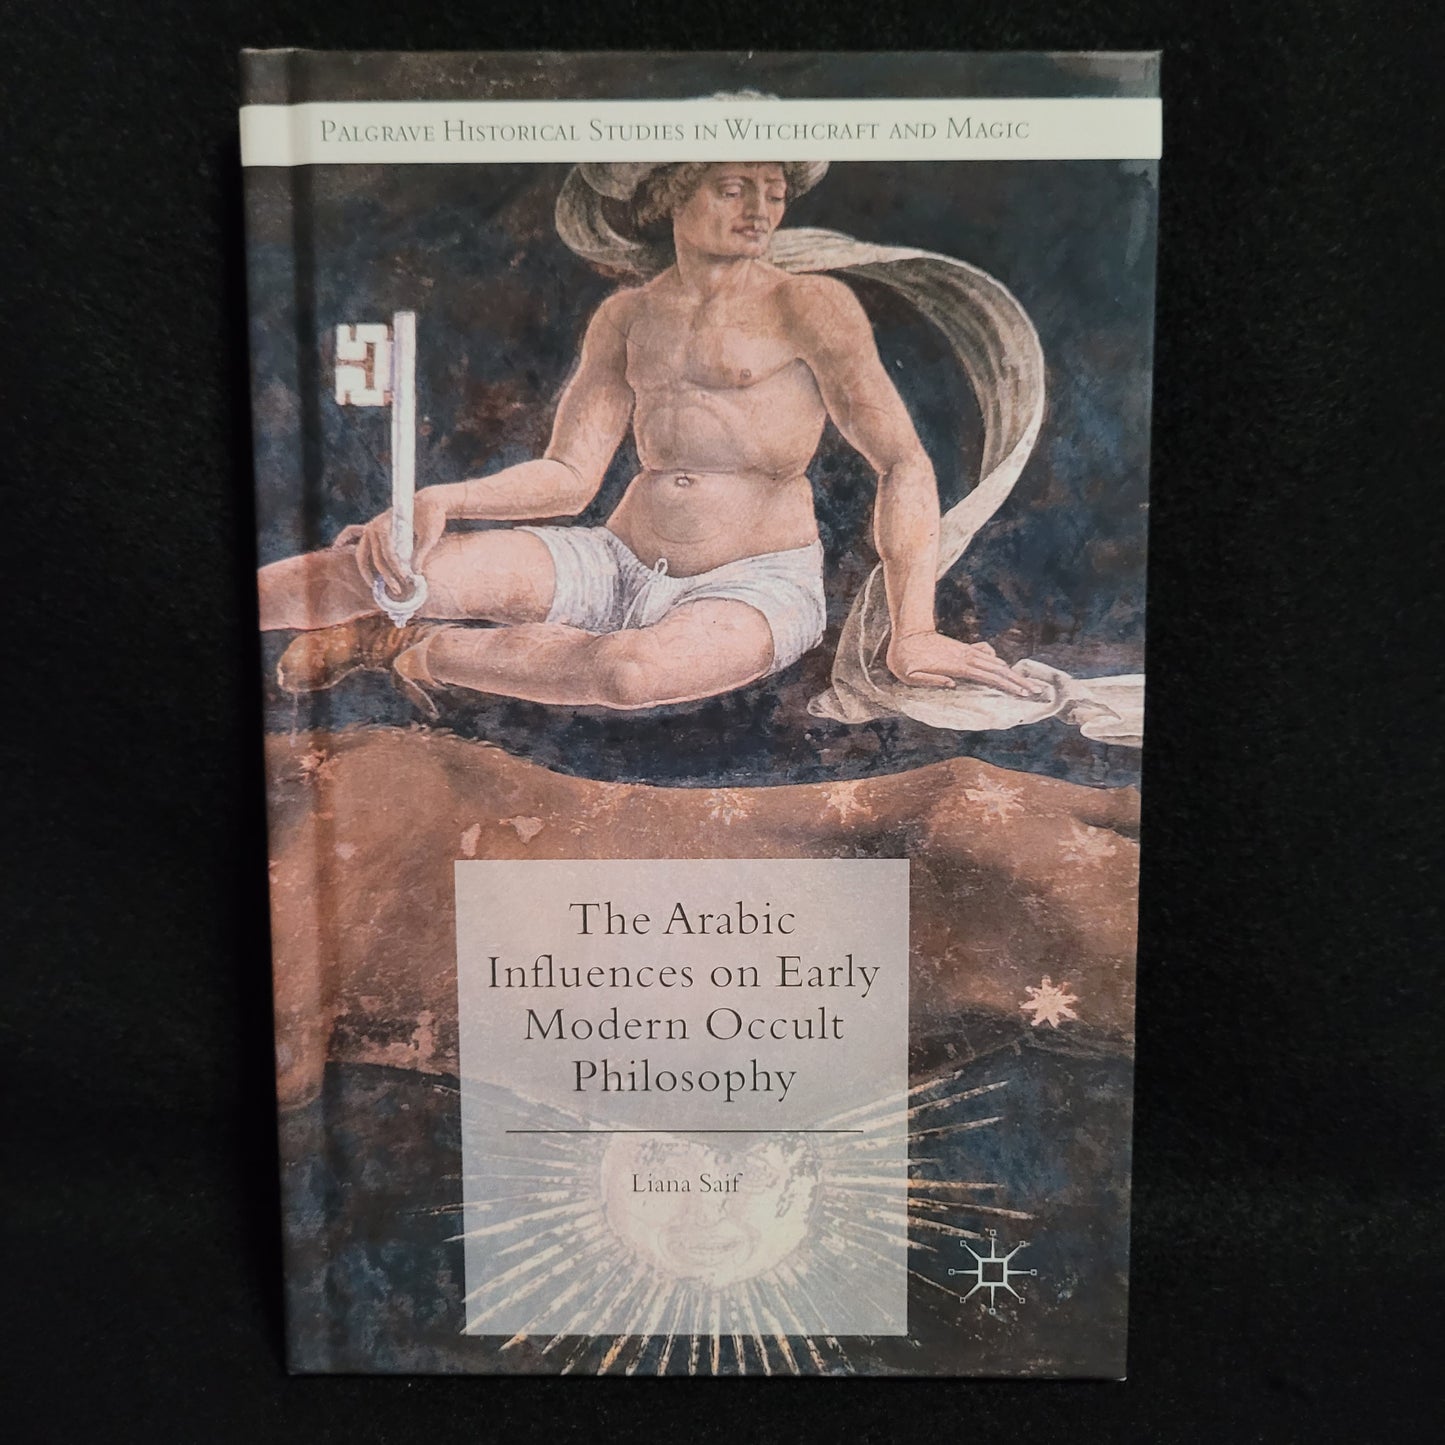 The Arabic Influences on Early Modern Occult Philosophy by Liana Saif (Palgrave Macmillan, 2015) Hardcover